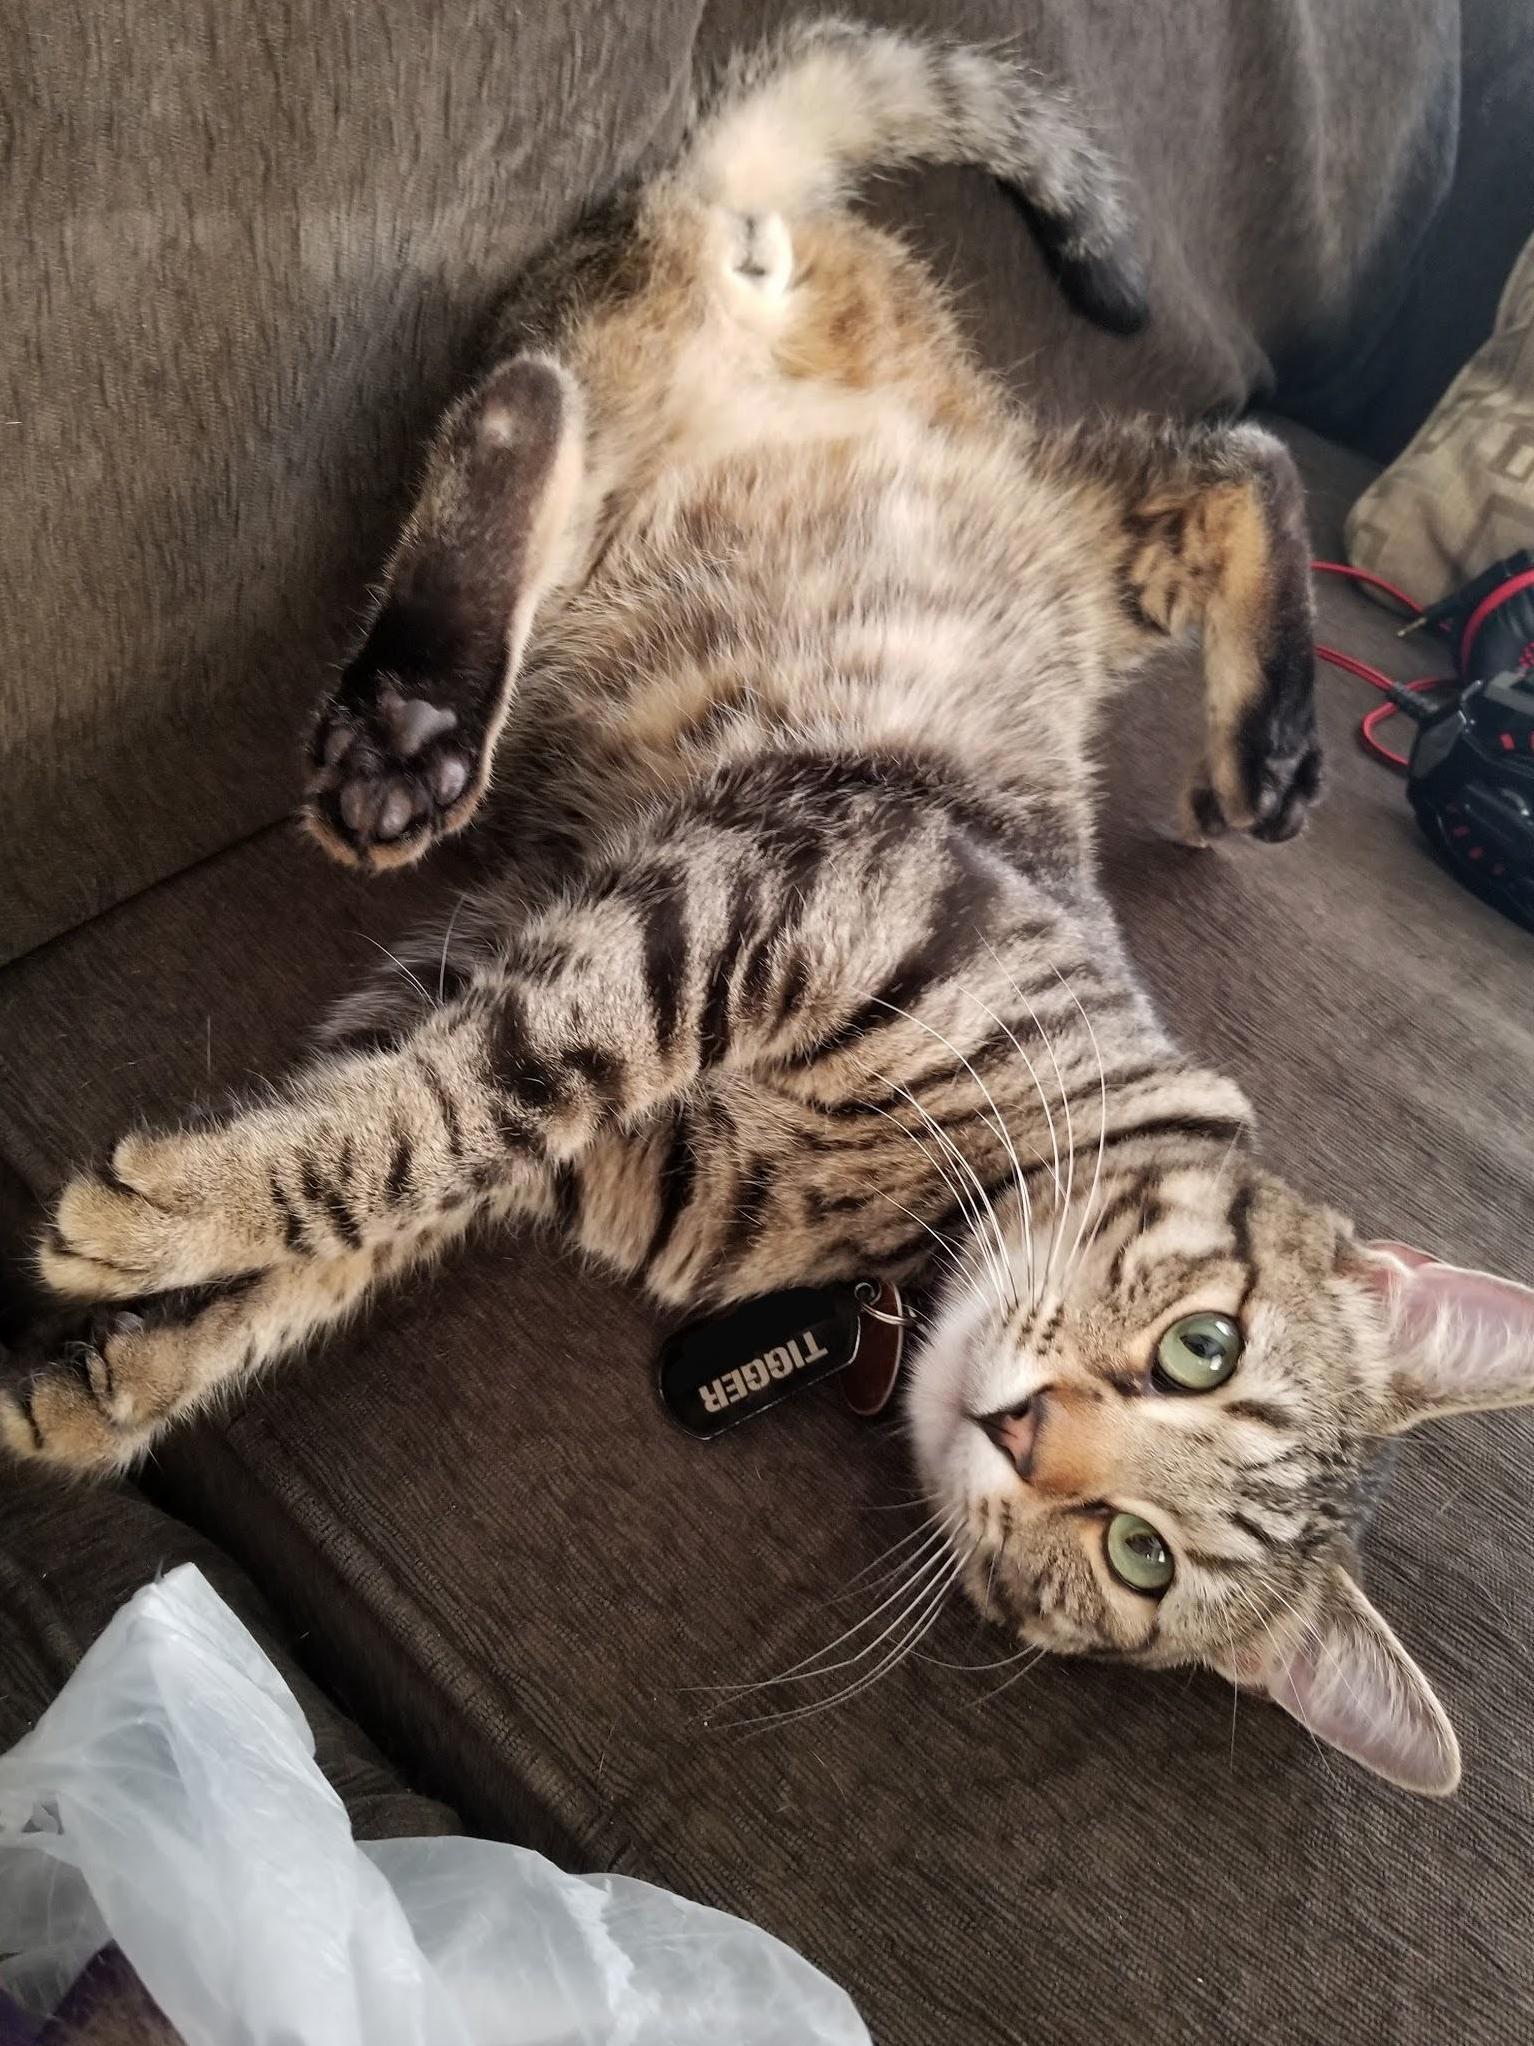 My daughters 2yr old, 12lb, beautiful big boy tigger, has the best personality. love that kitty belly!!!